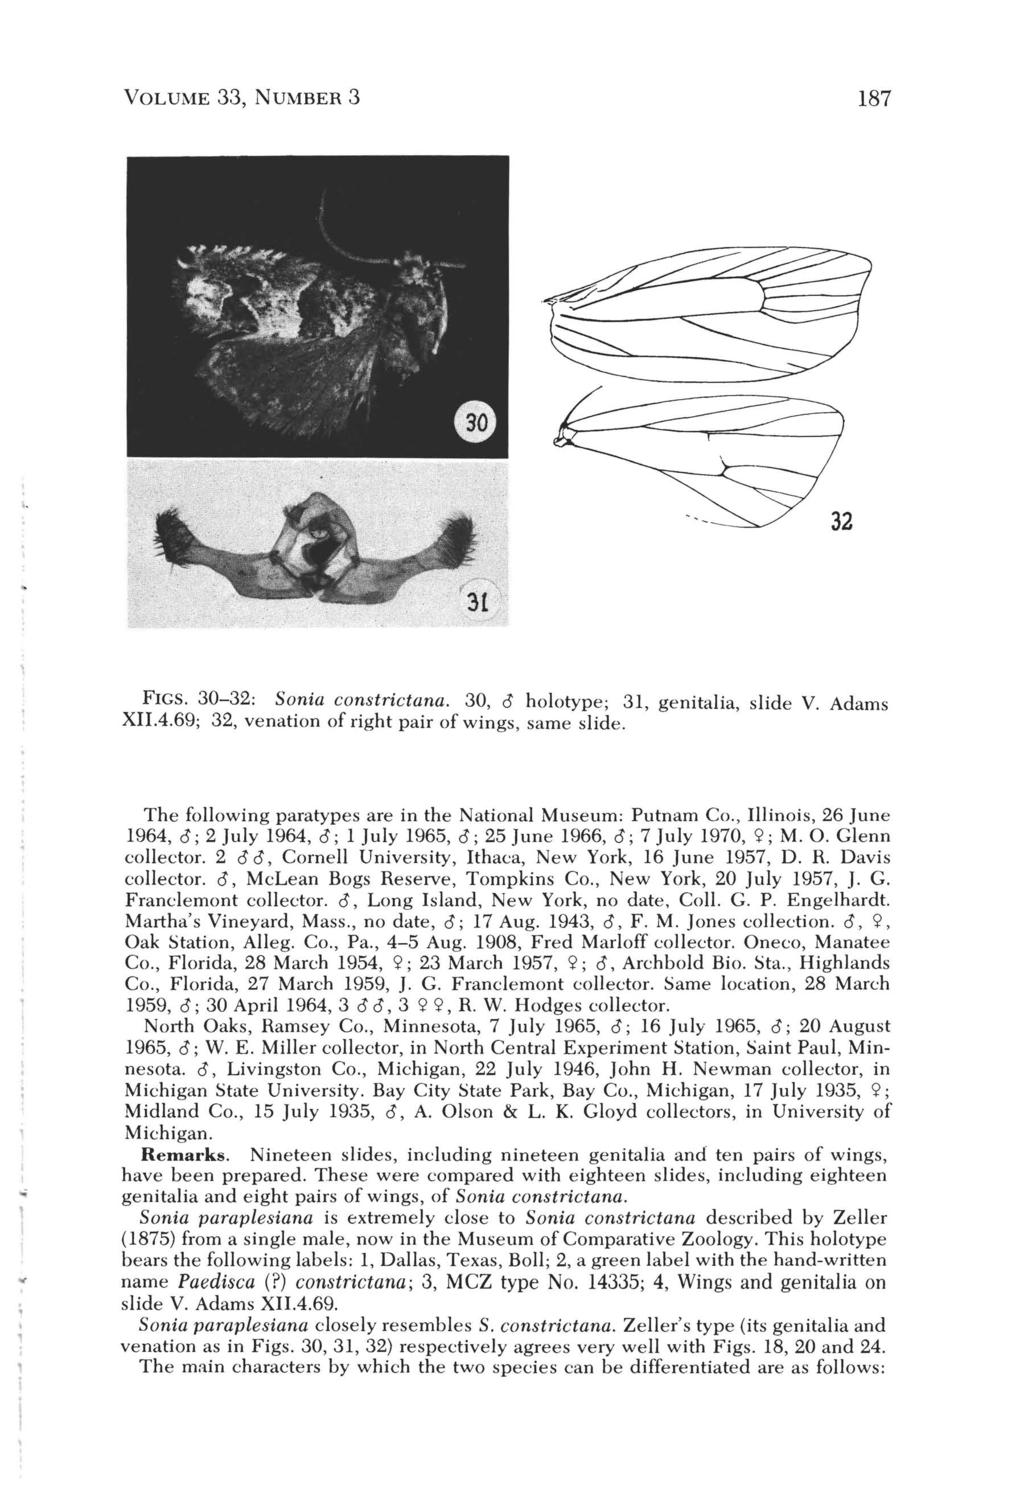 VOLUME 33, NUMBER 3 187 FIGS. 30-32: Sonia constrictana. 30, 0 holotype; 31, genitalia, slide V. Adams XII.4.69; 32, venation of right pair of wings, same slide.